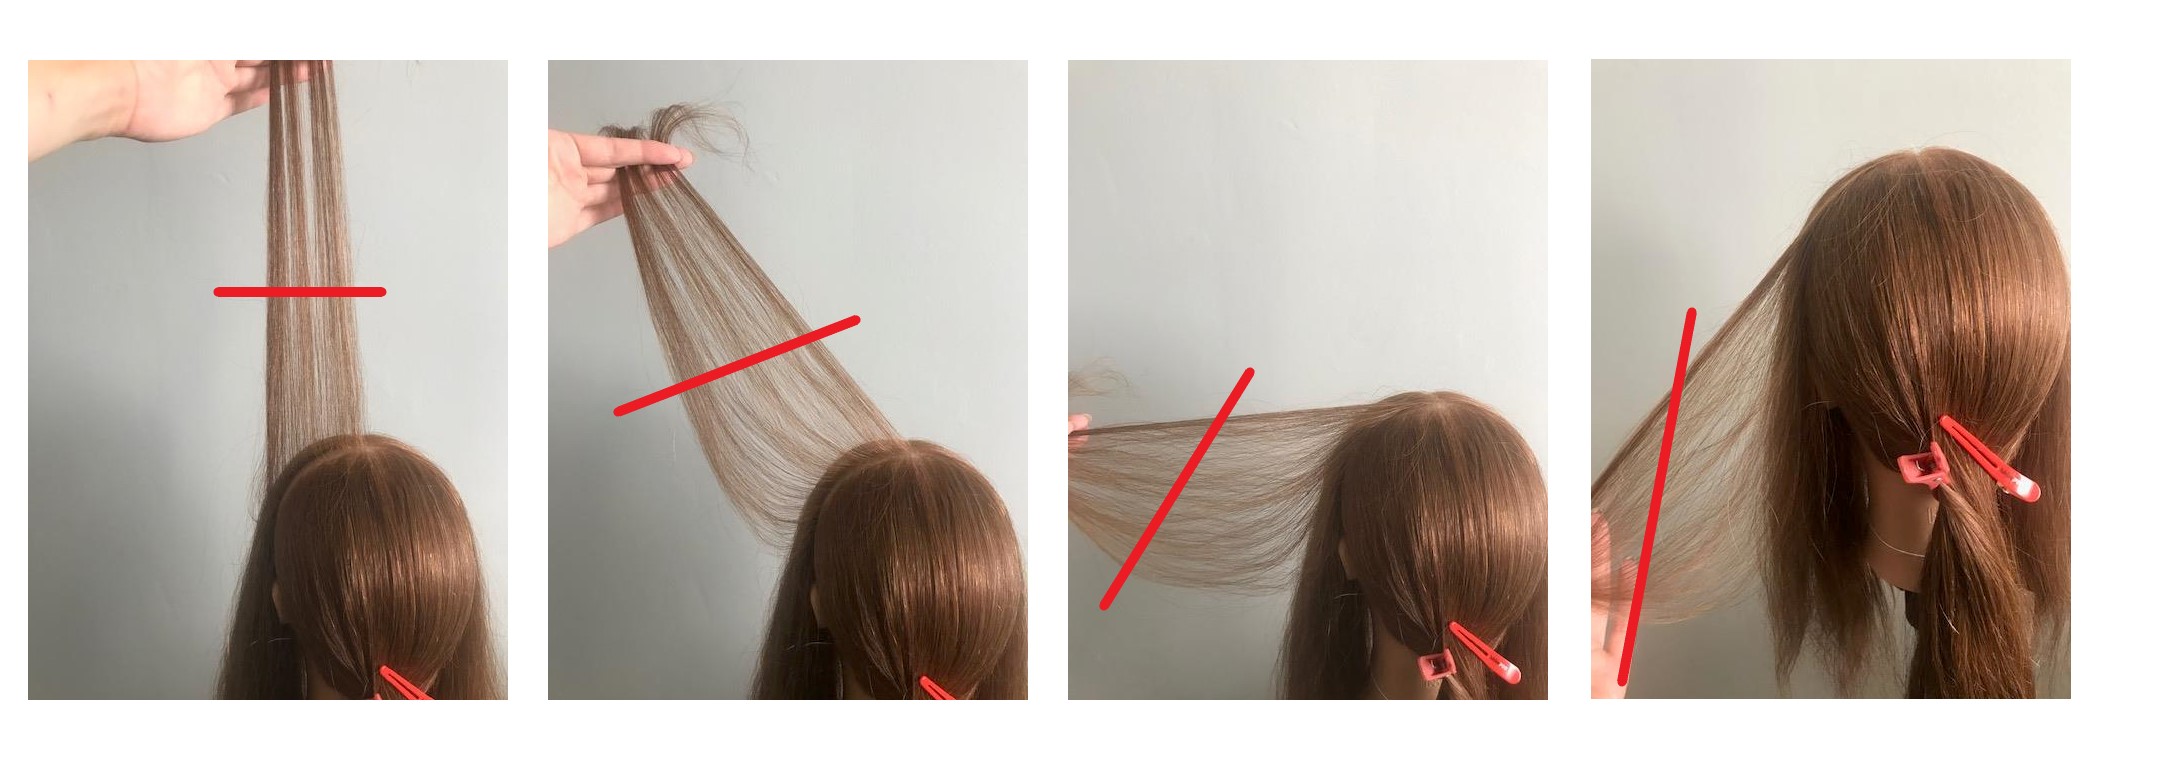 Four pictures showing how a line moves depending on the angle that a section of hair is pulled at.